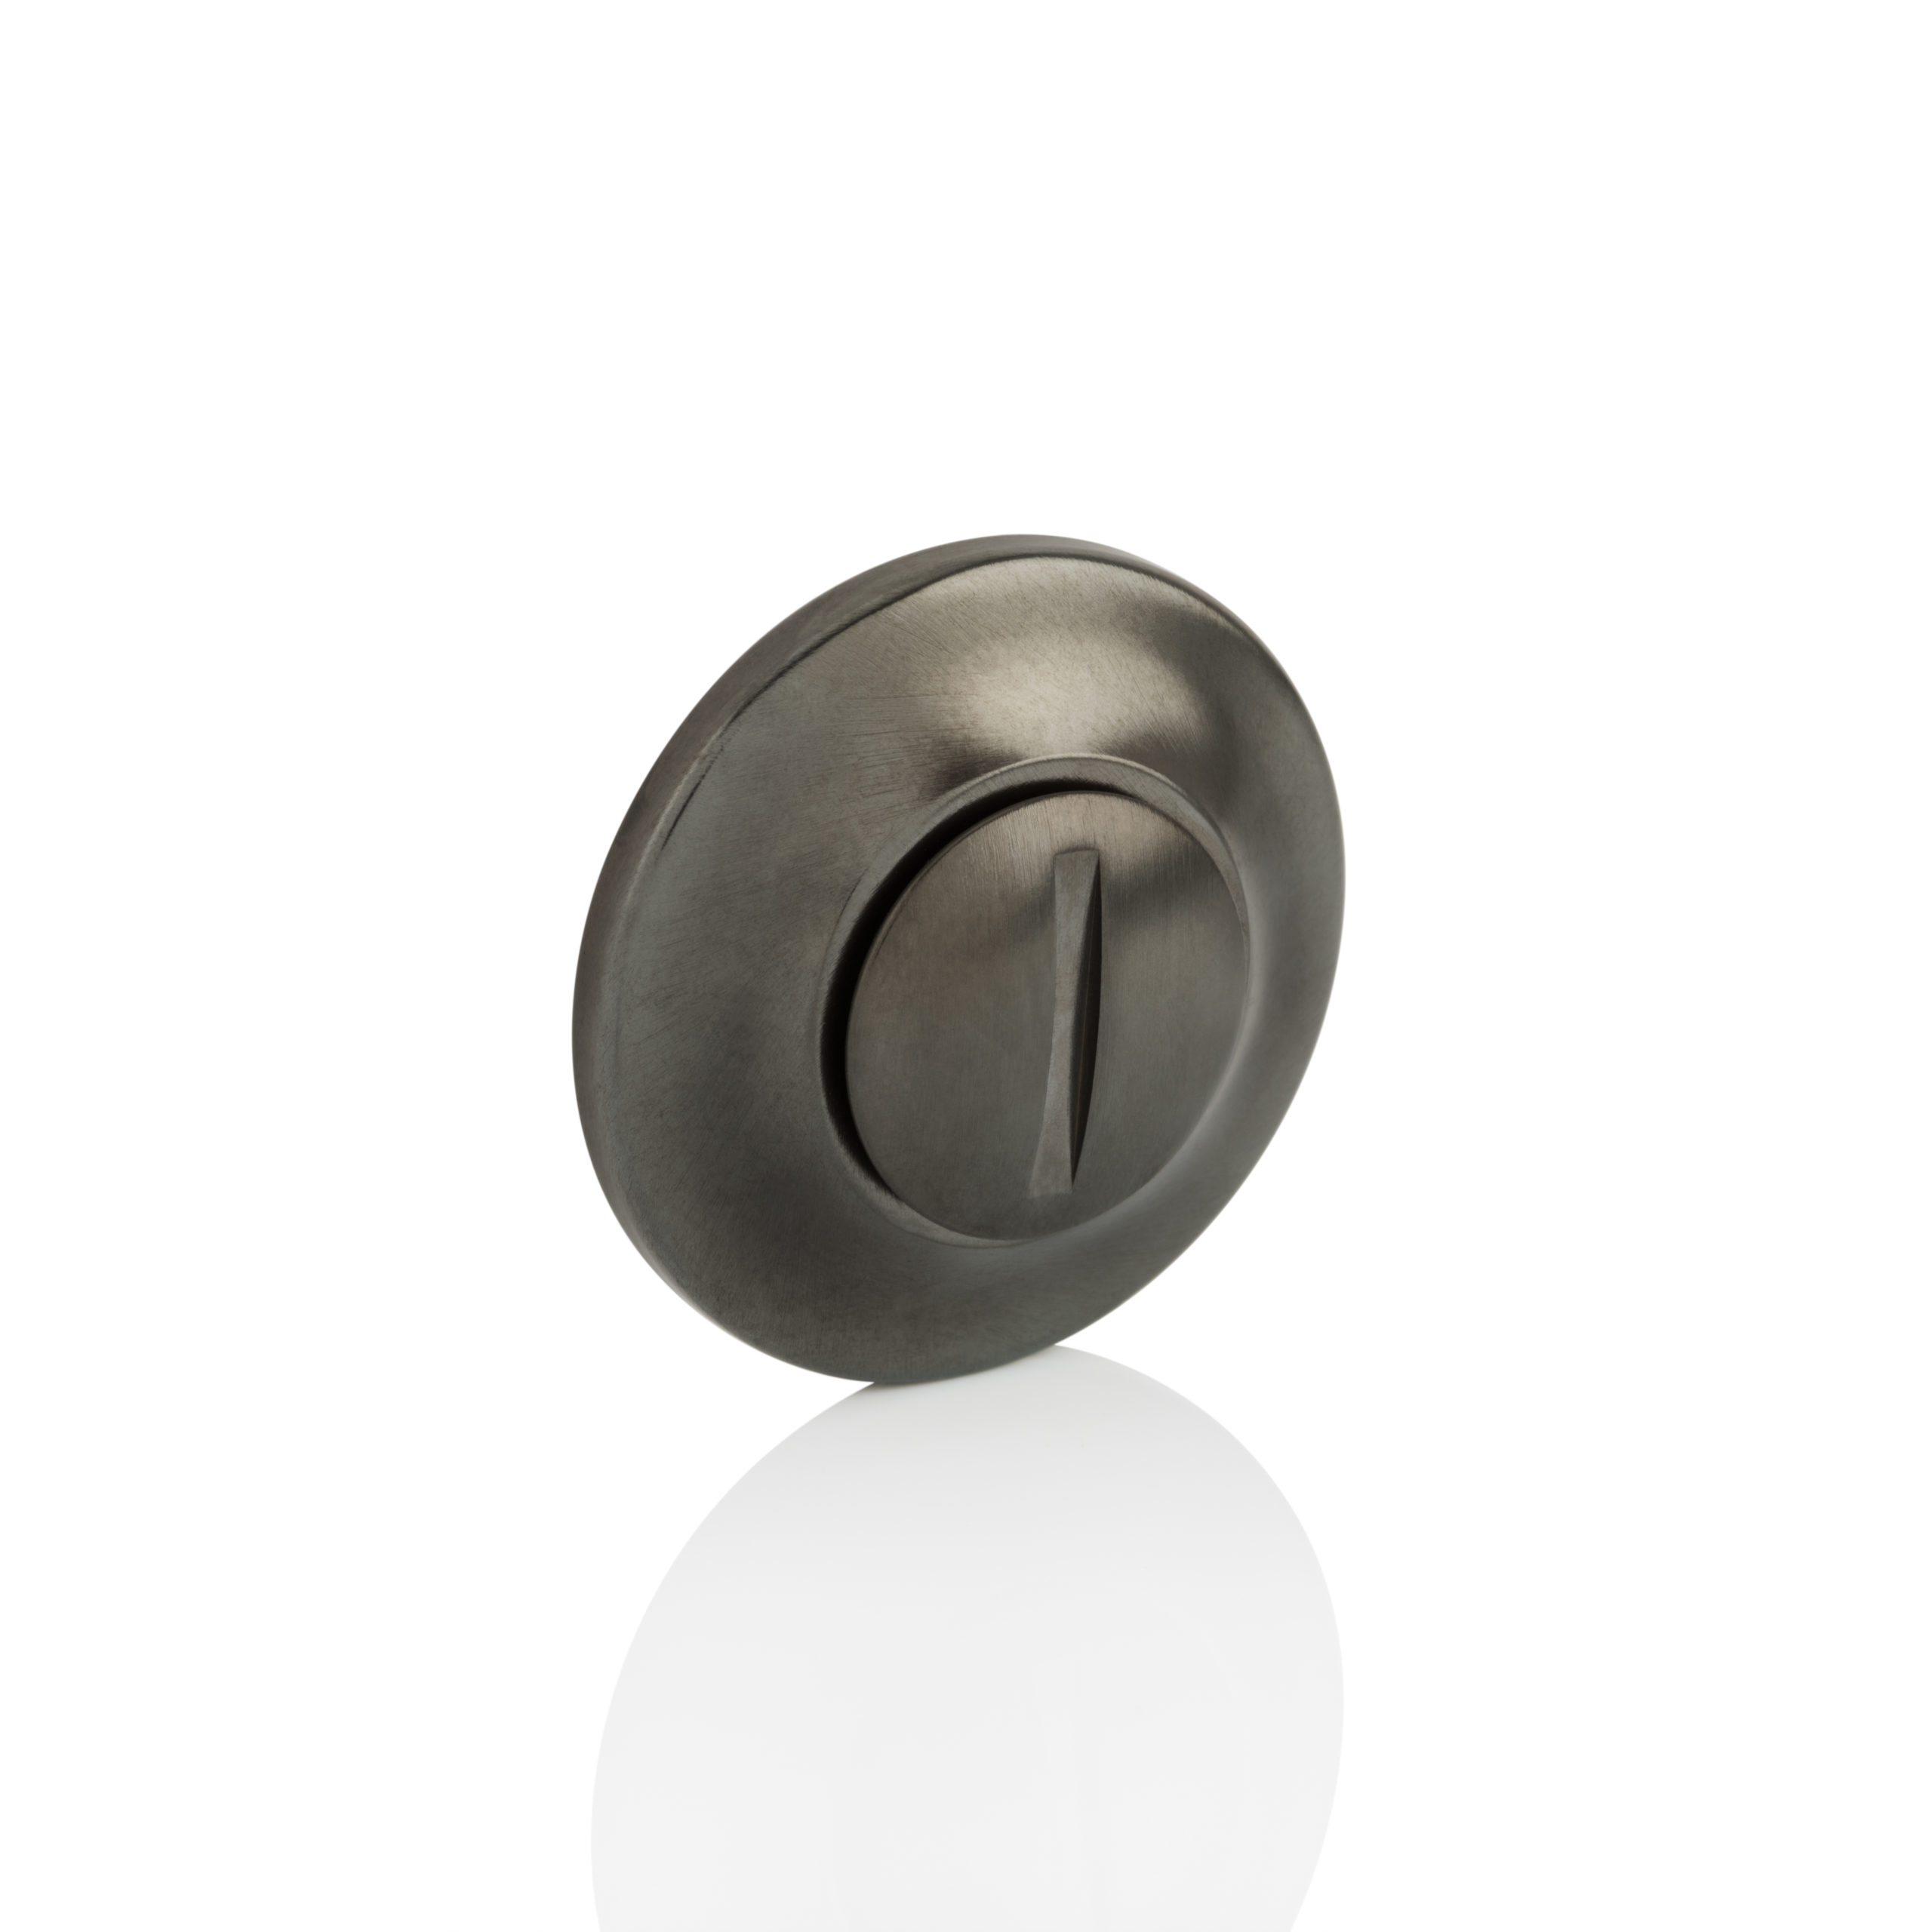 Joseph Giles - INTRICATELY HAMMERED solid brass oval door knob